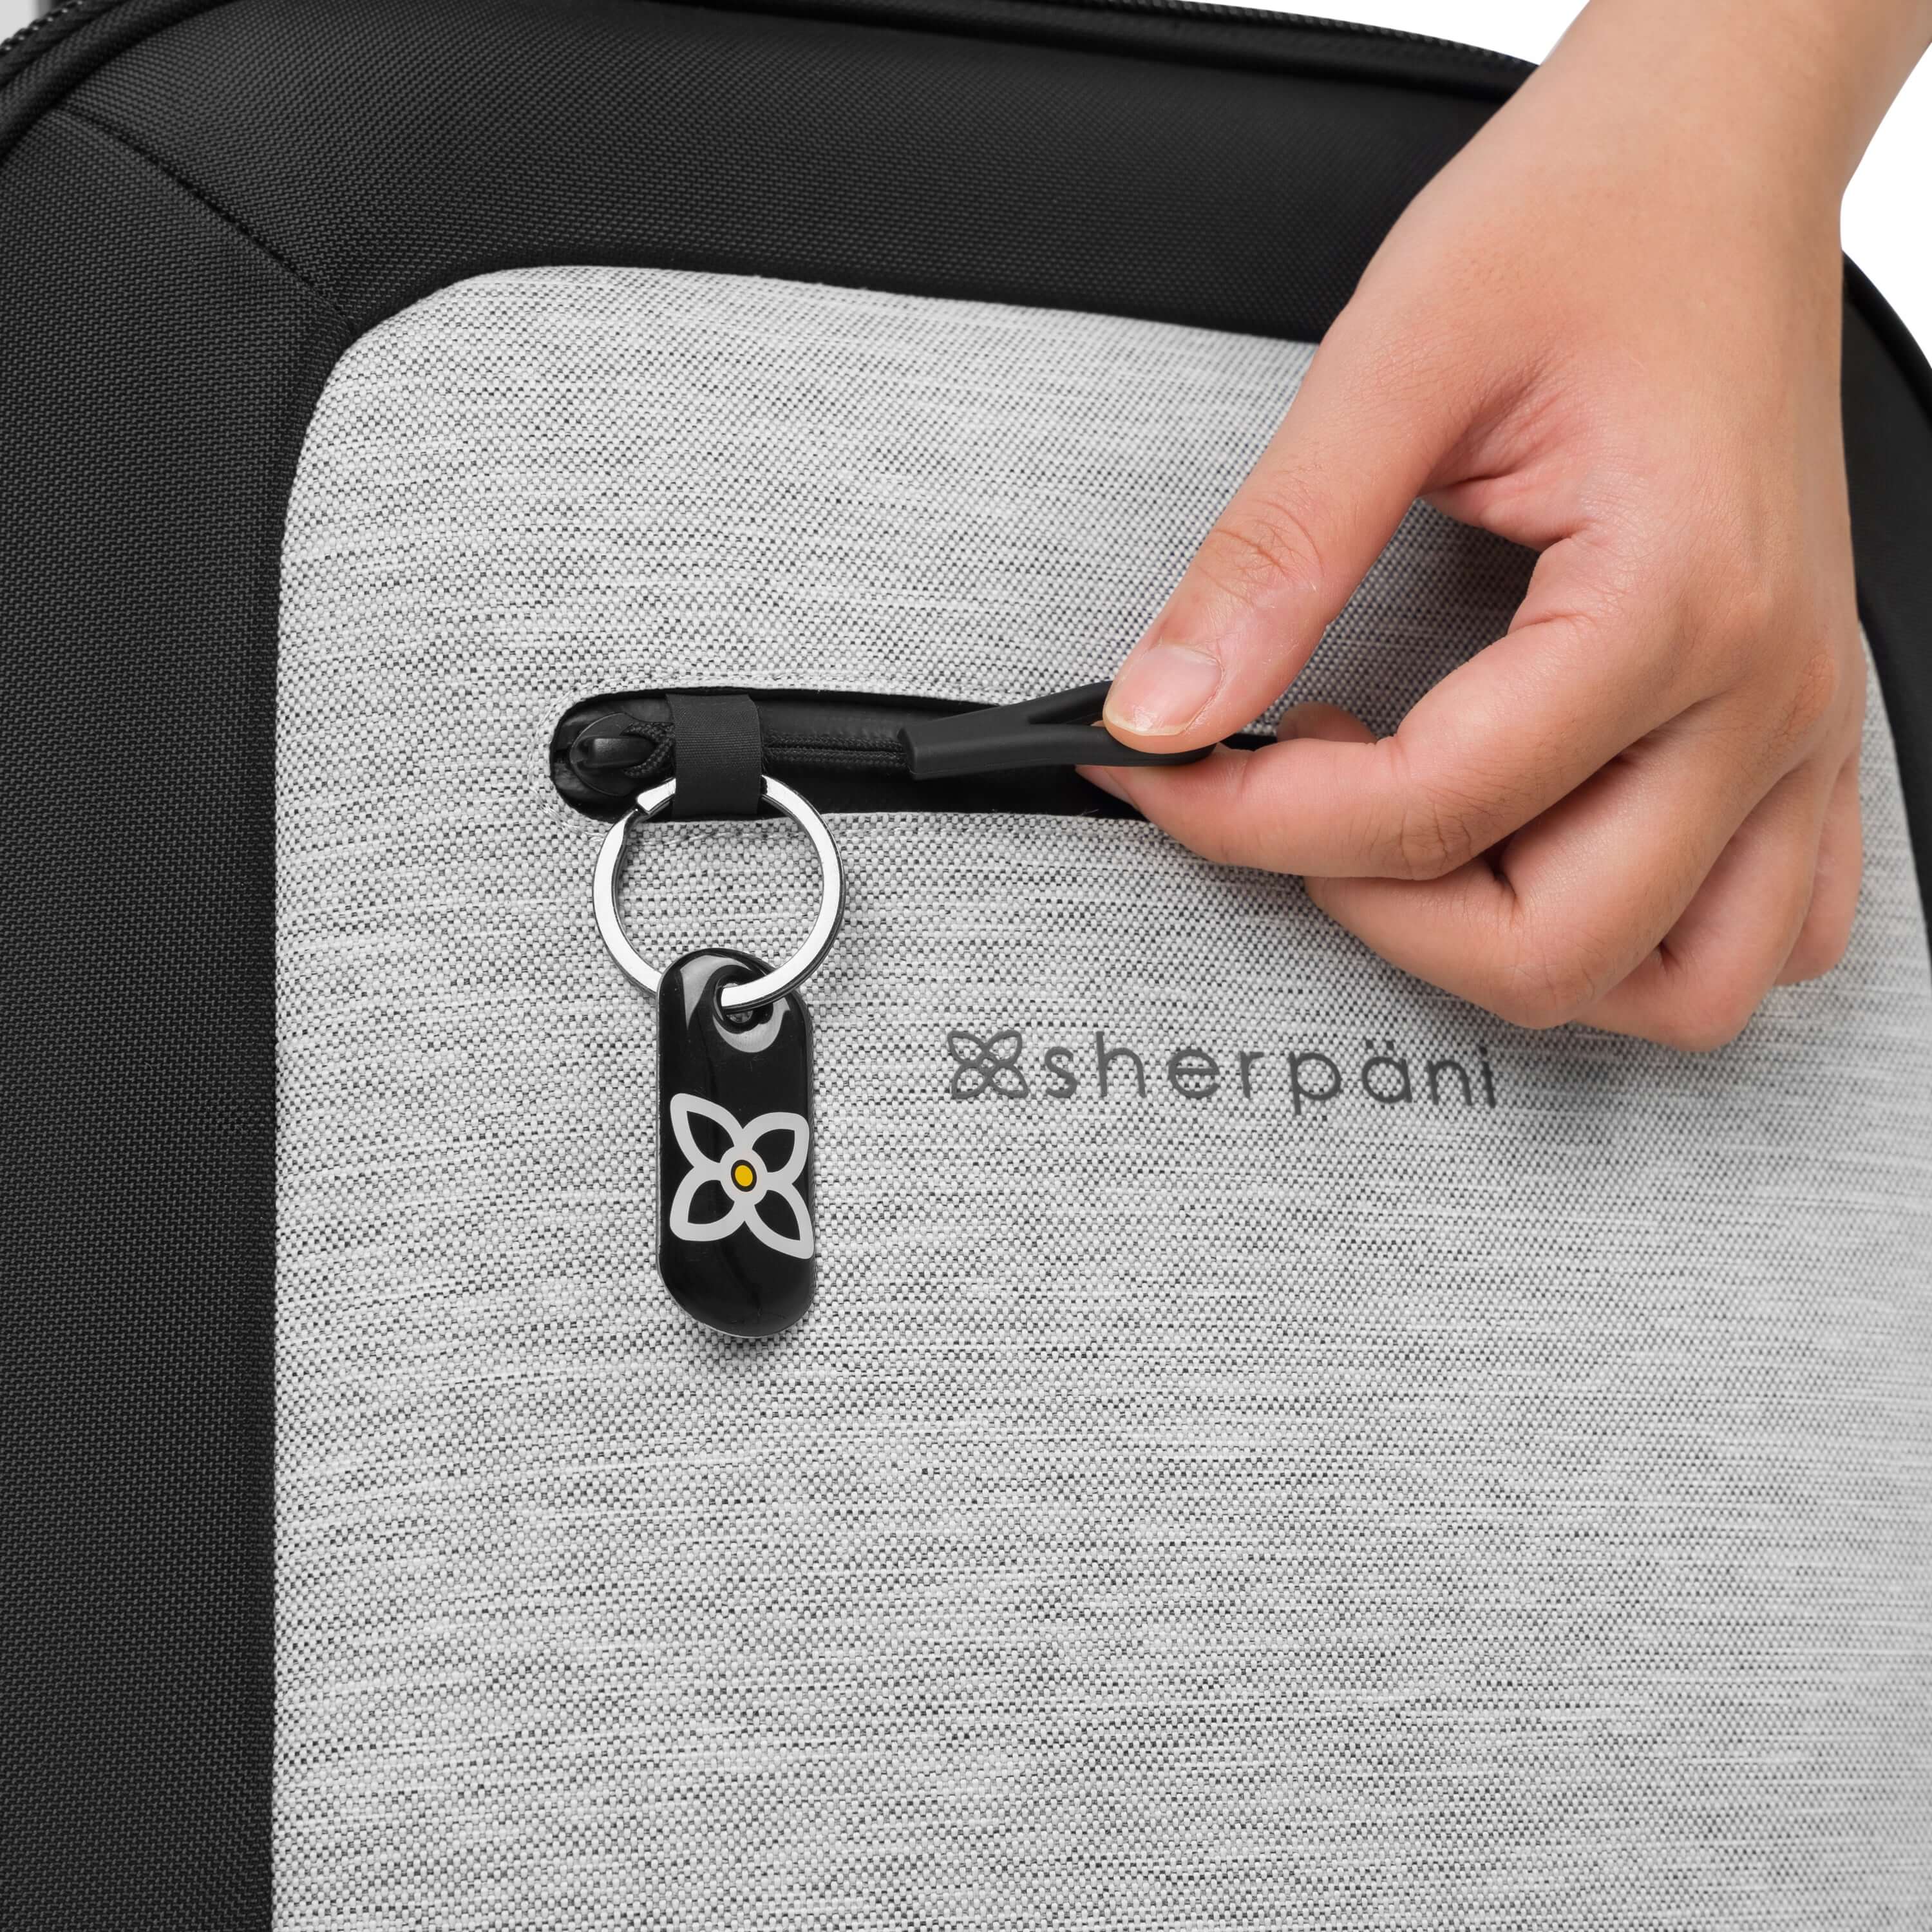 Zipper Locks - Zipper security for travel bags, purses, and backpack  zippers 